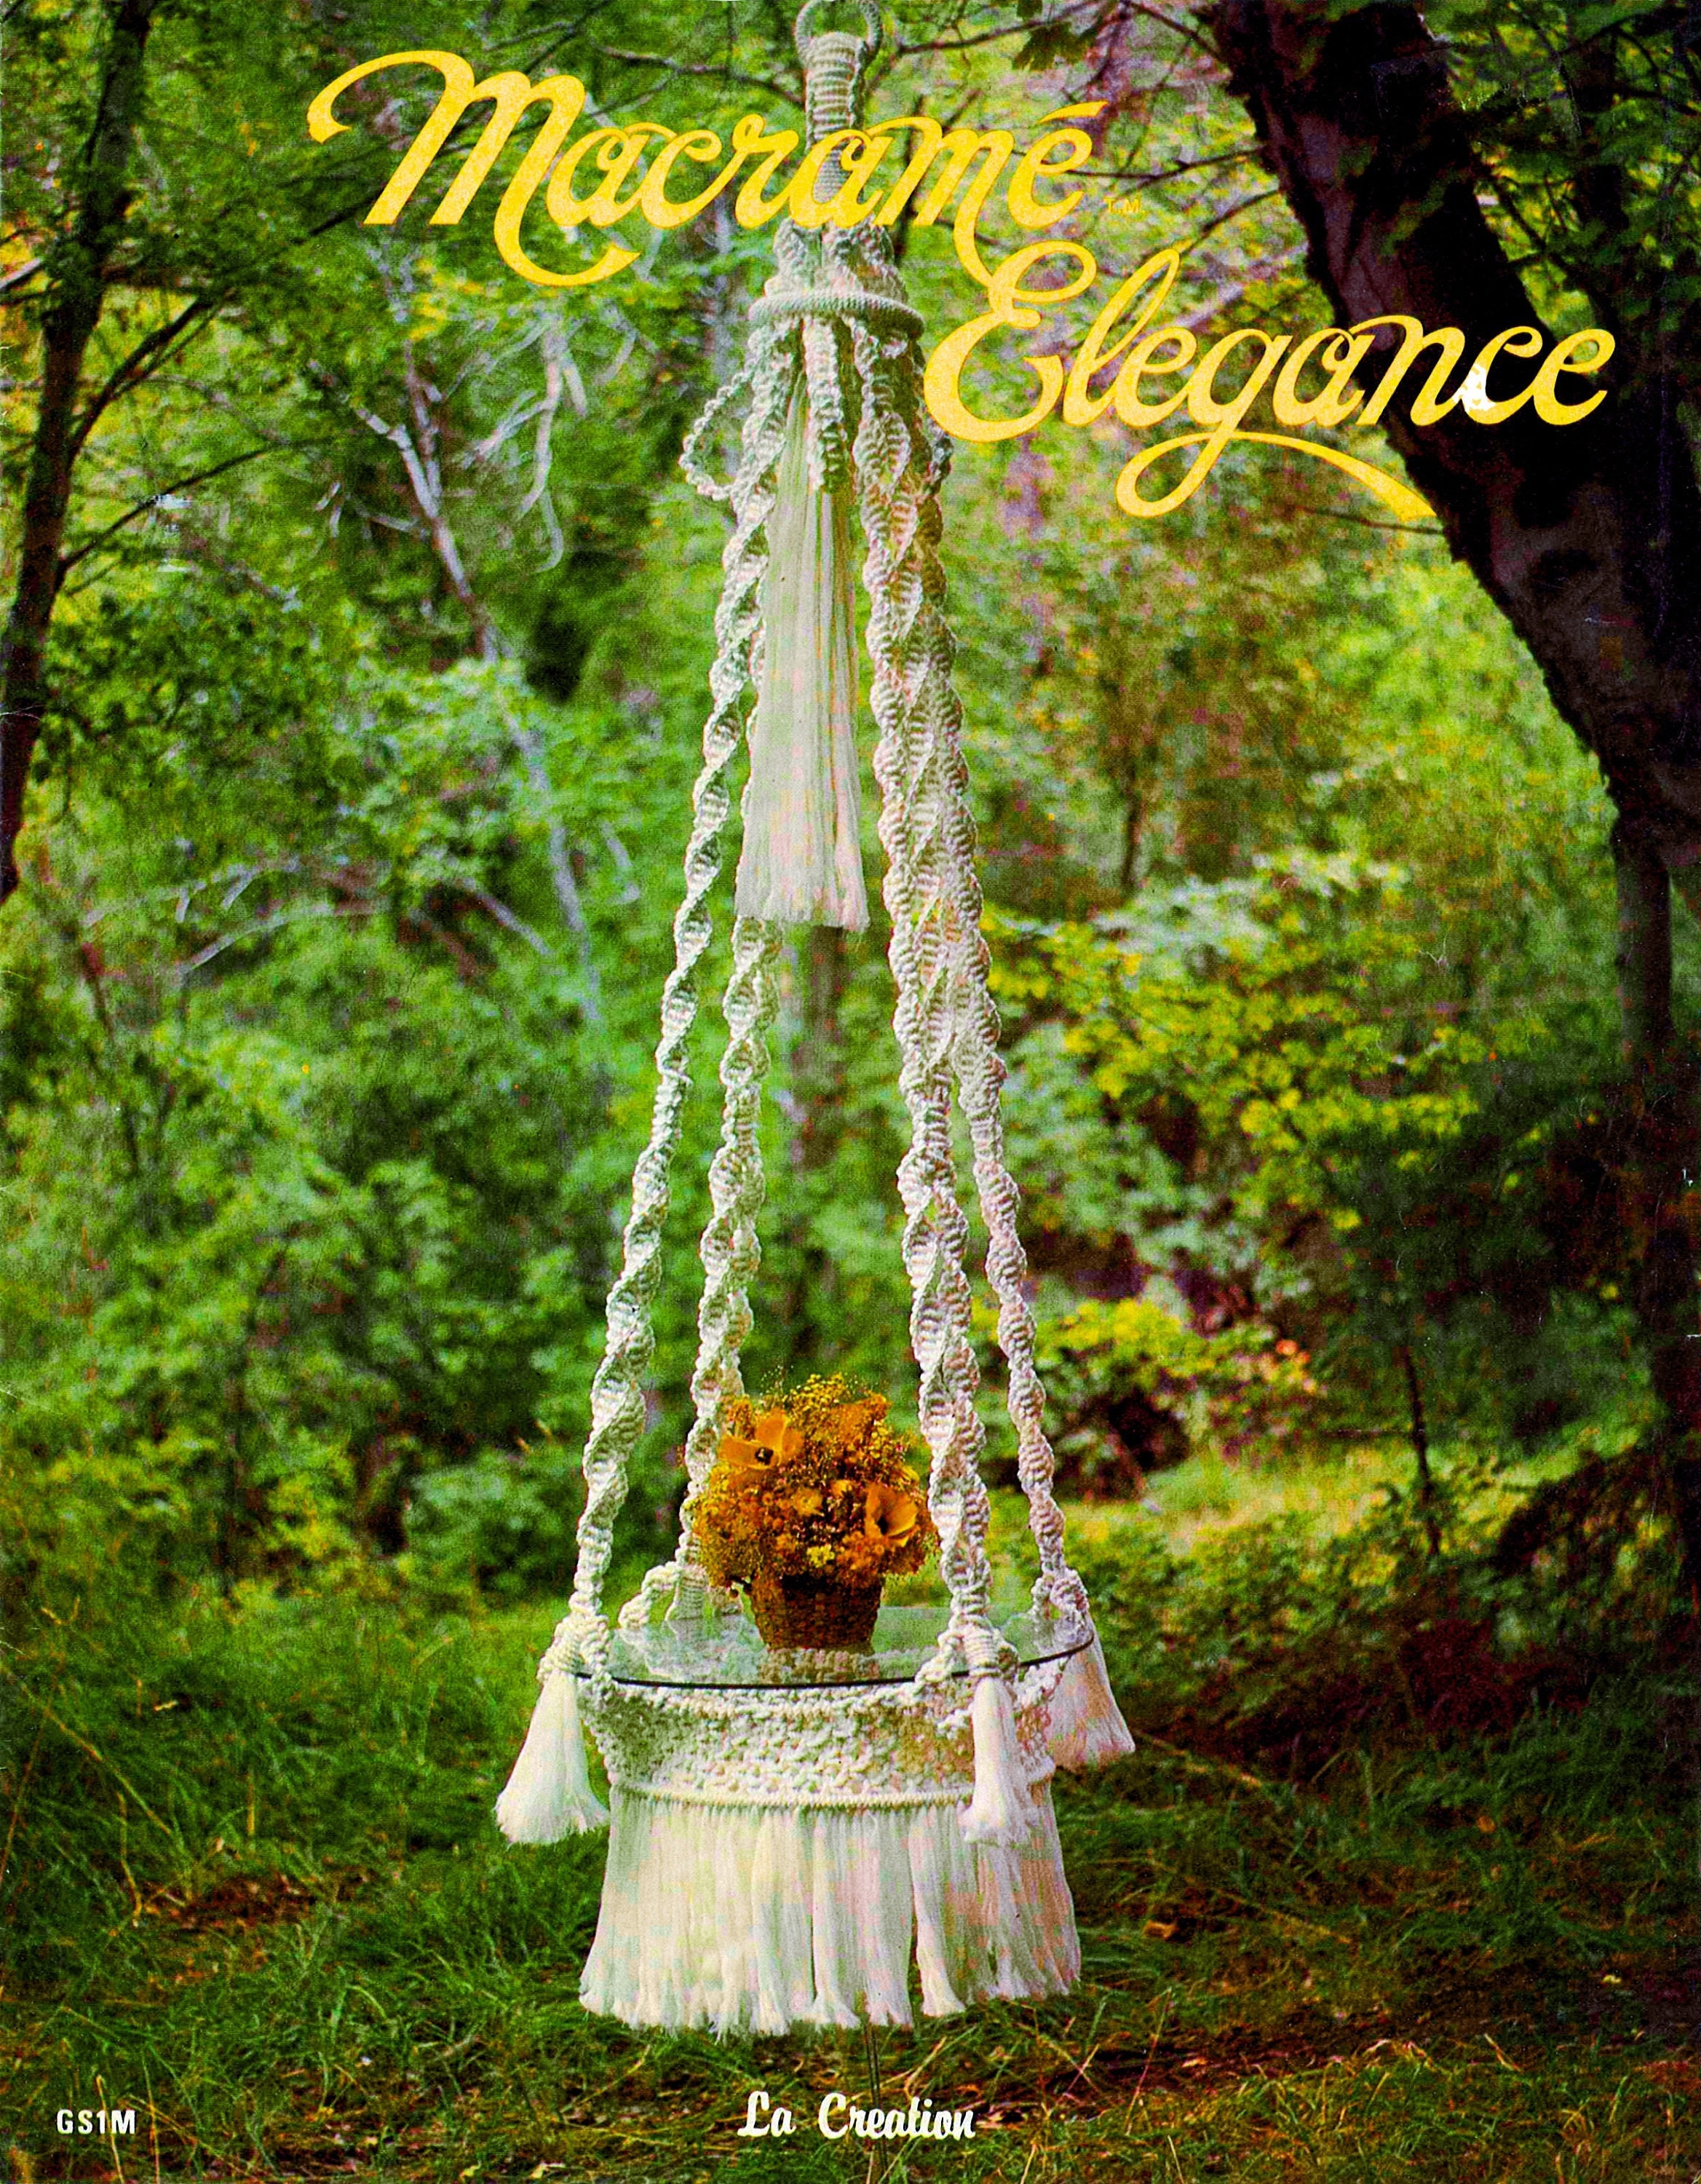 Leisure Arts Macrame? Wall Hangings Book - Macram� Books for adults and  beginners, easy instructions to learn 11 patterns that will inspire your  projects